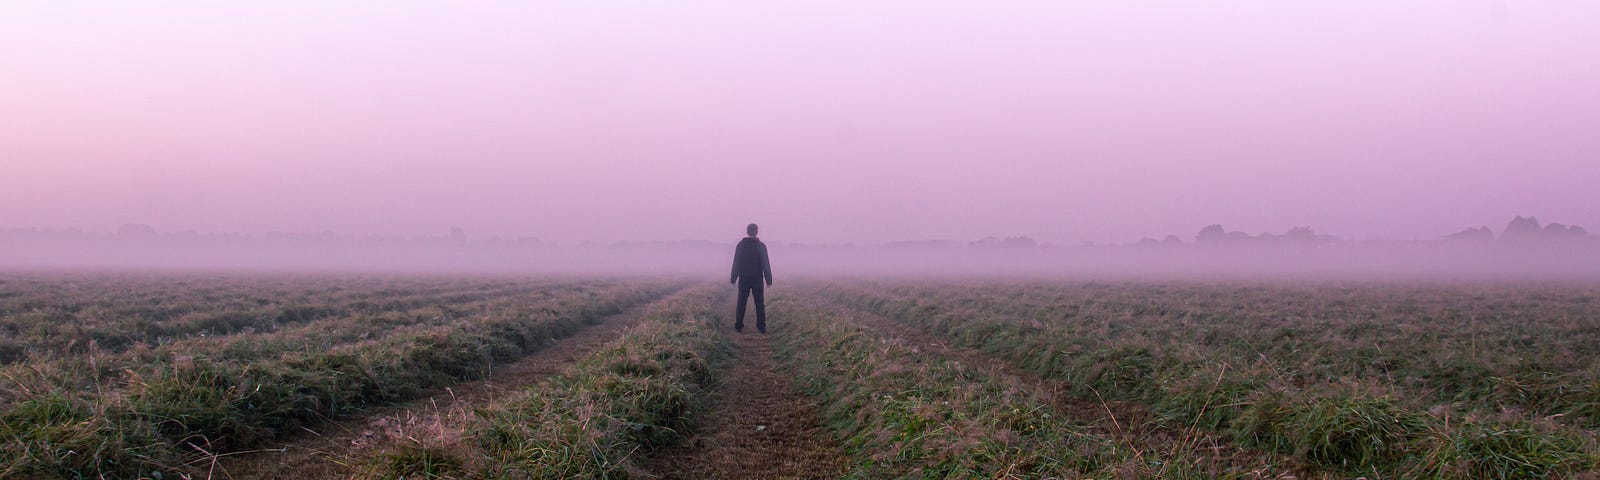 A mysterious lone figure standing in a field on a beautiful early misty morning.